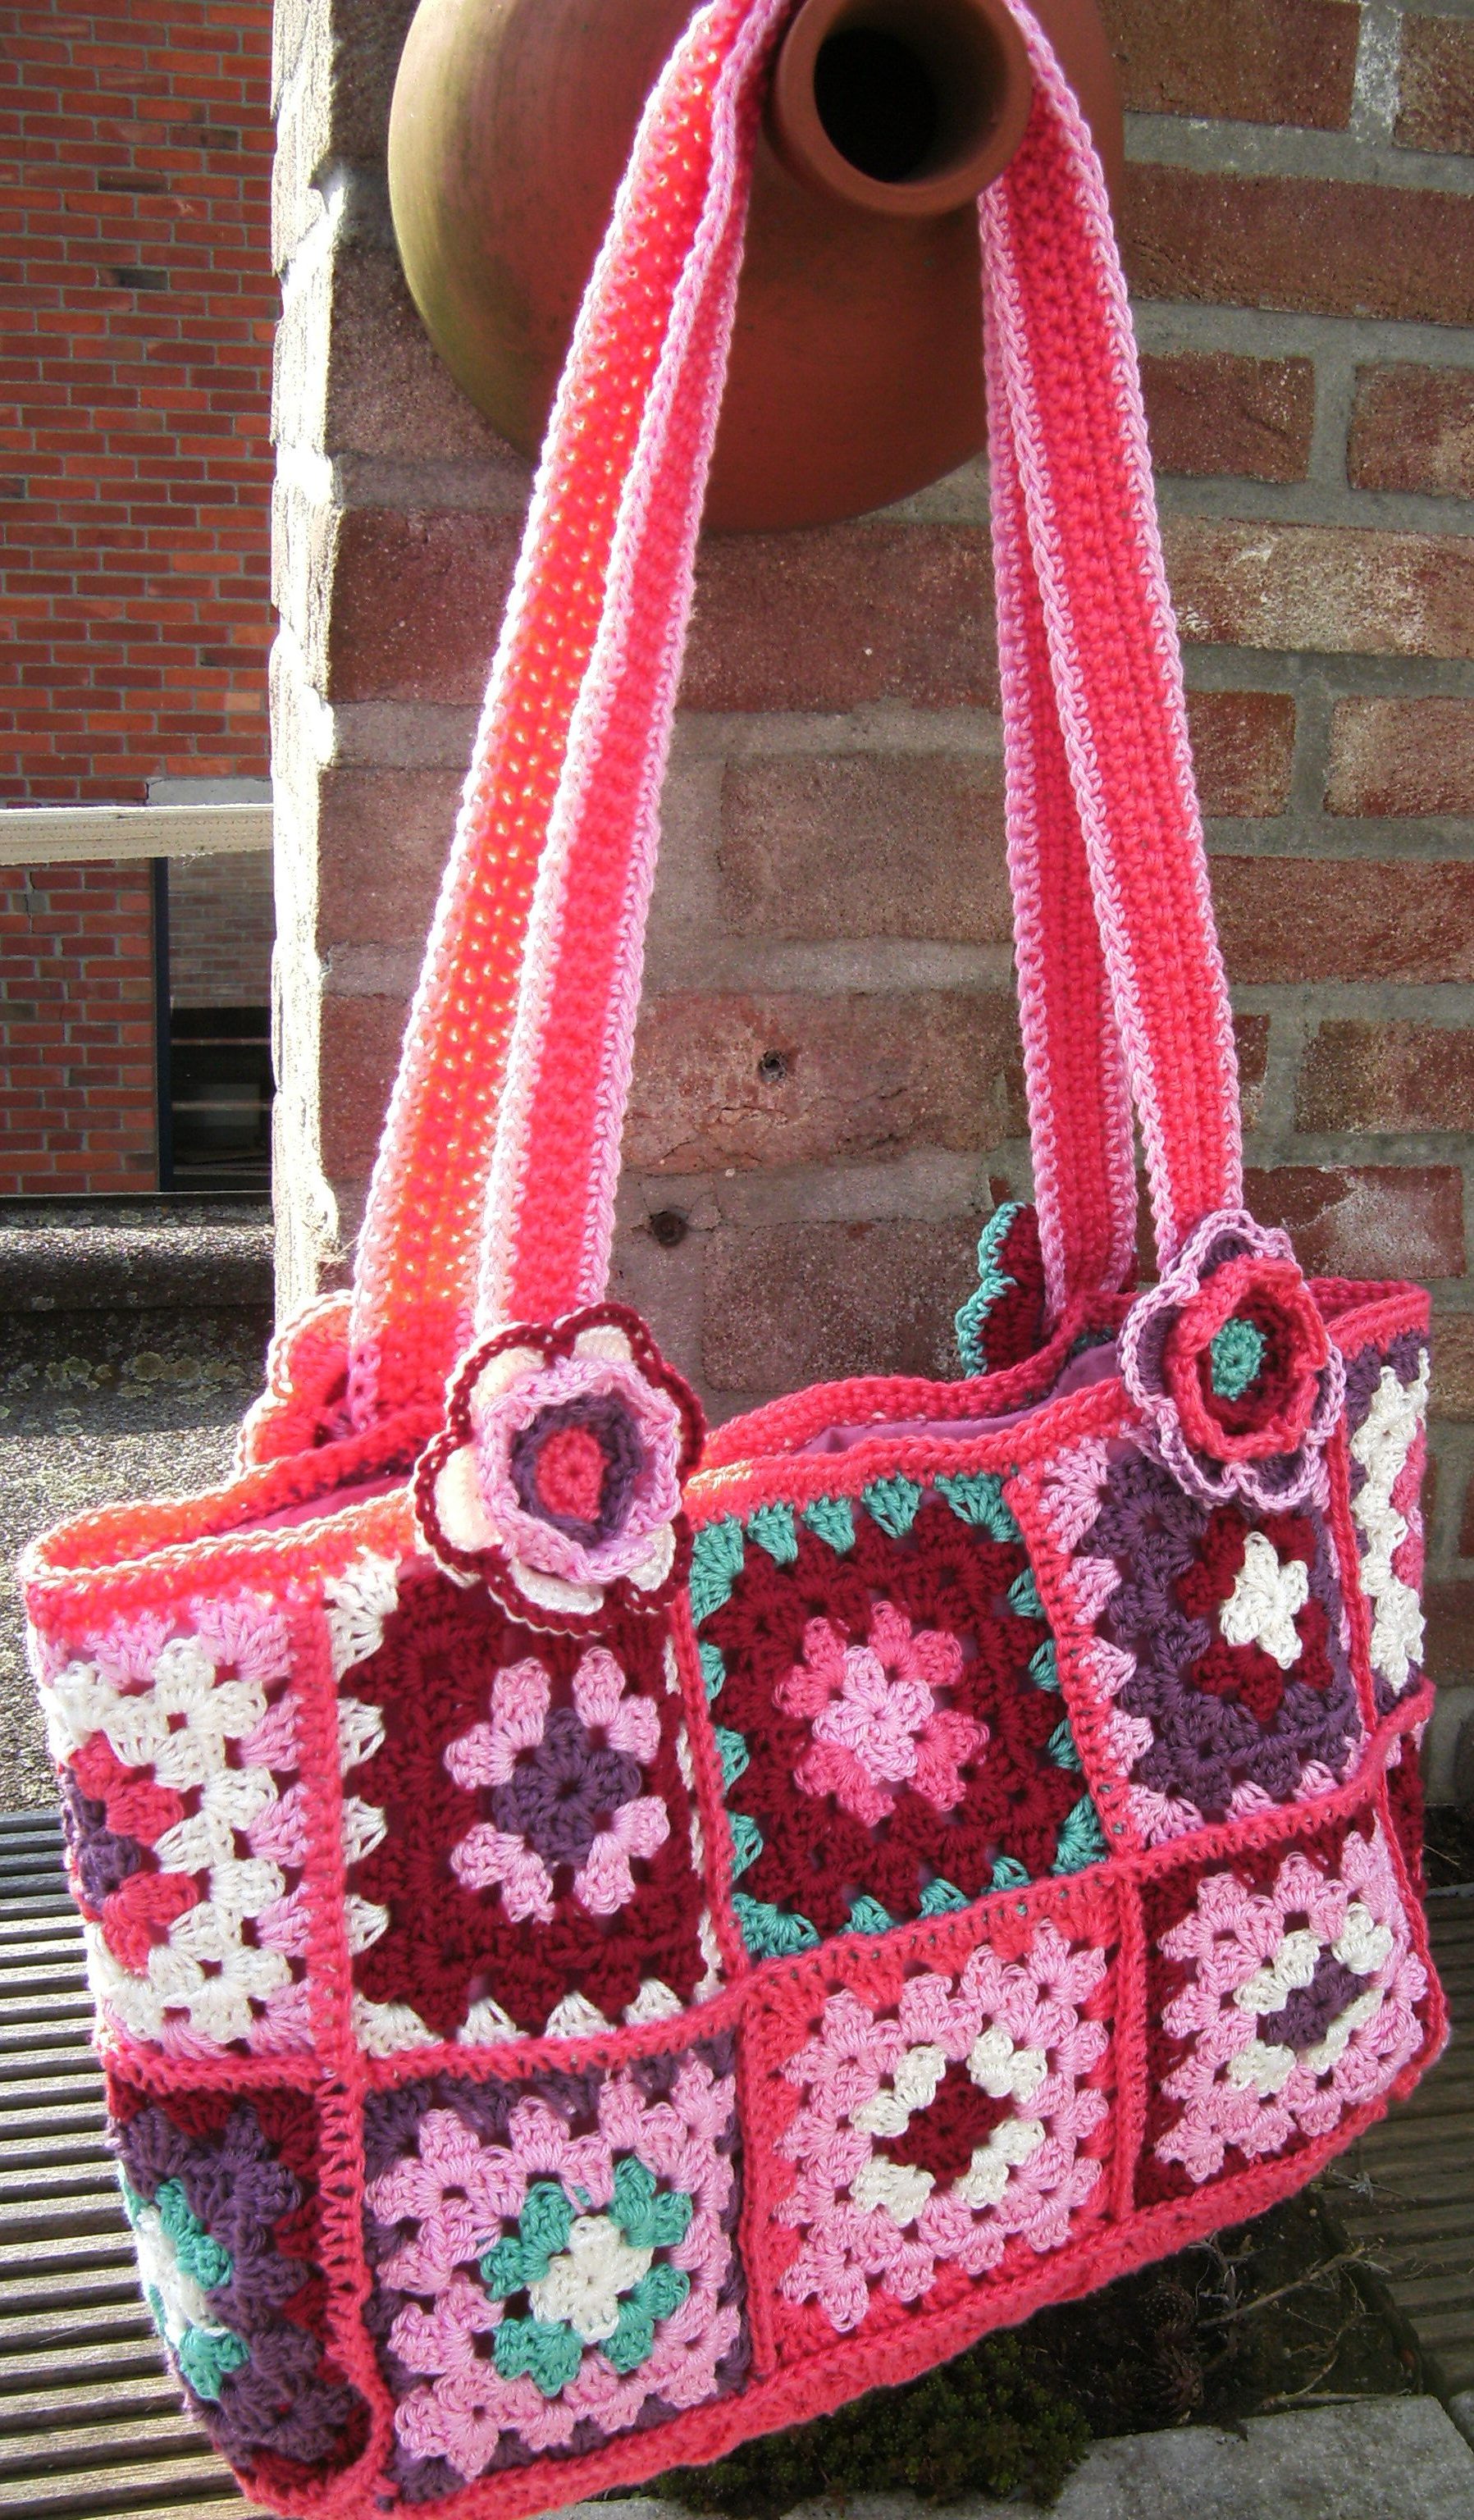 56+ Awesome Granny Square Crochet Bag Pattern Ideas - Page 2 of 56